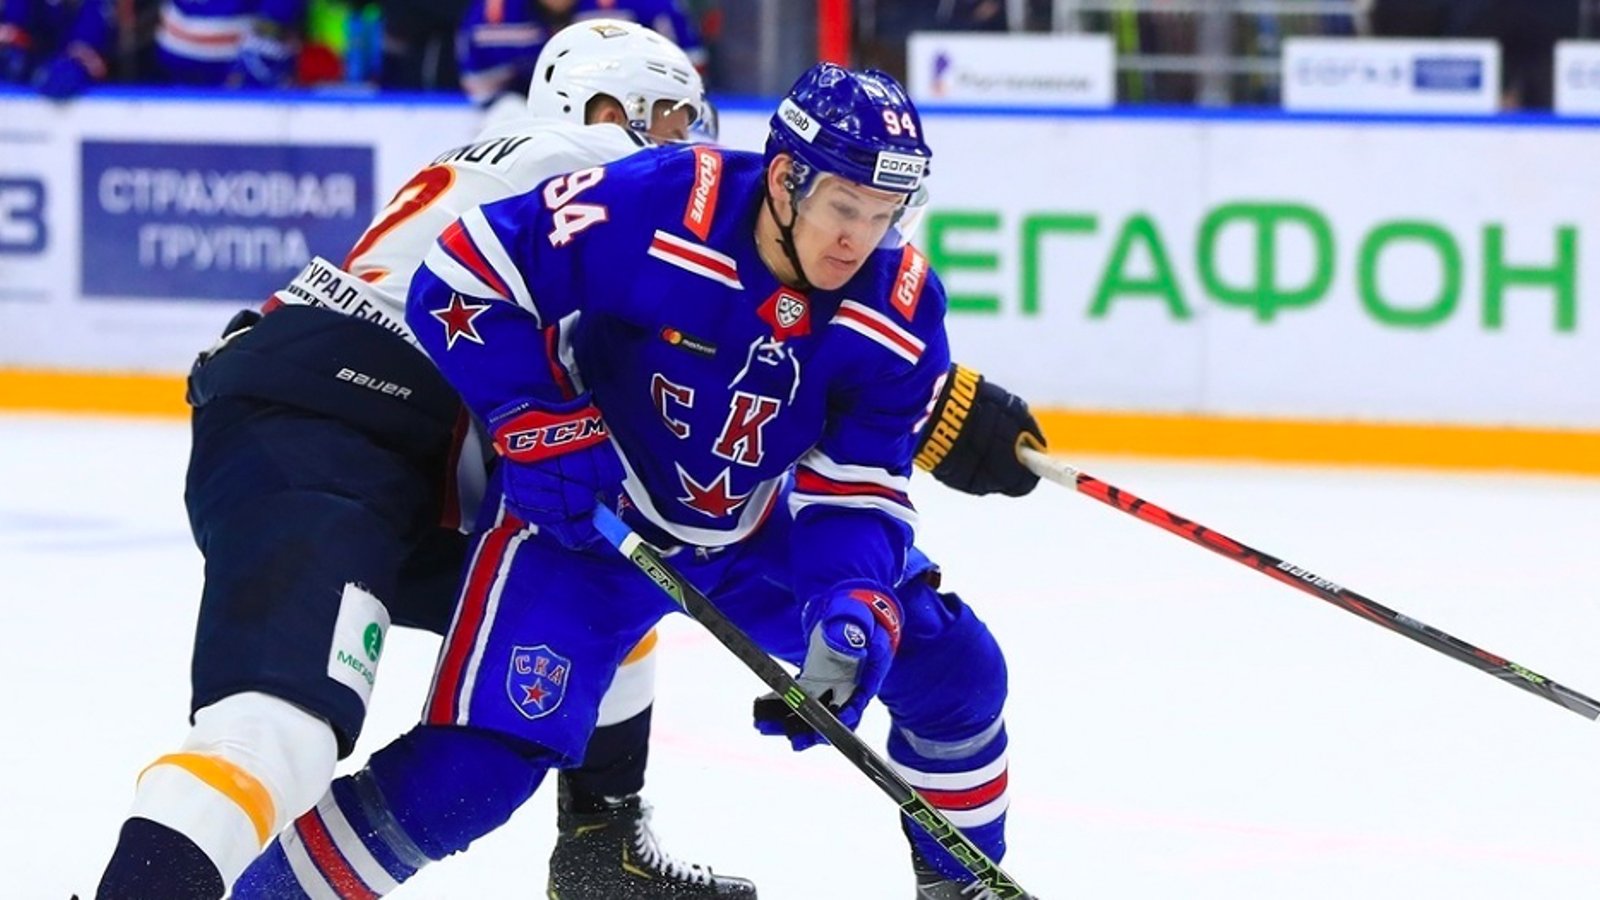 Report: Two NHL teams, including Leafs, named as frontrunners for KHL star Barabanov